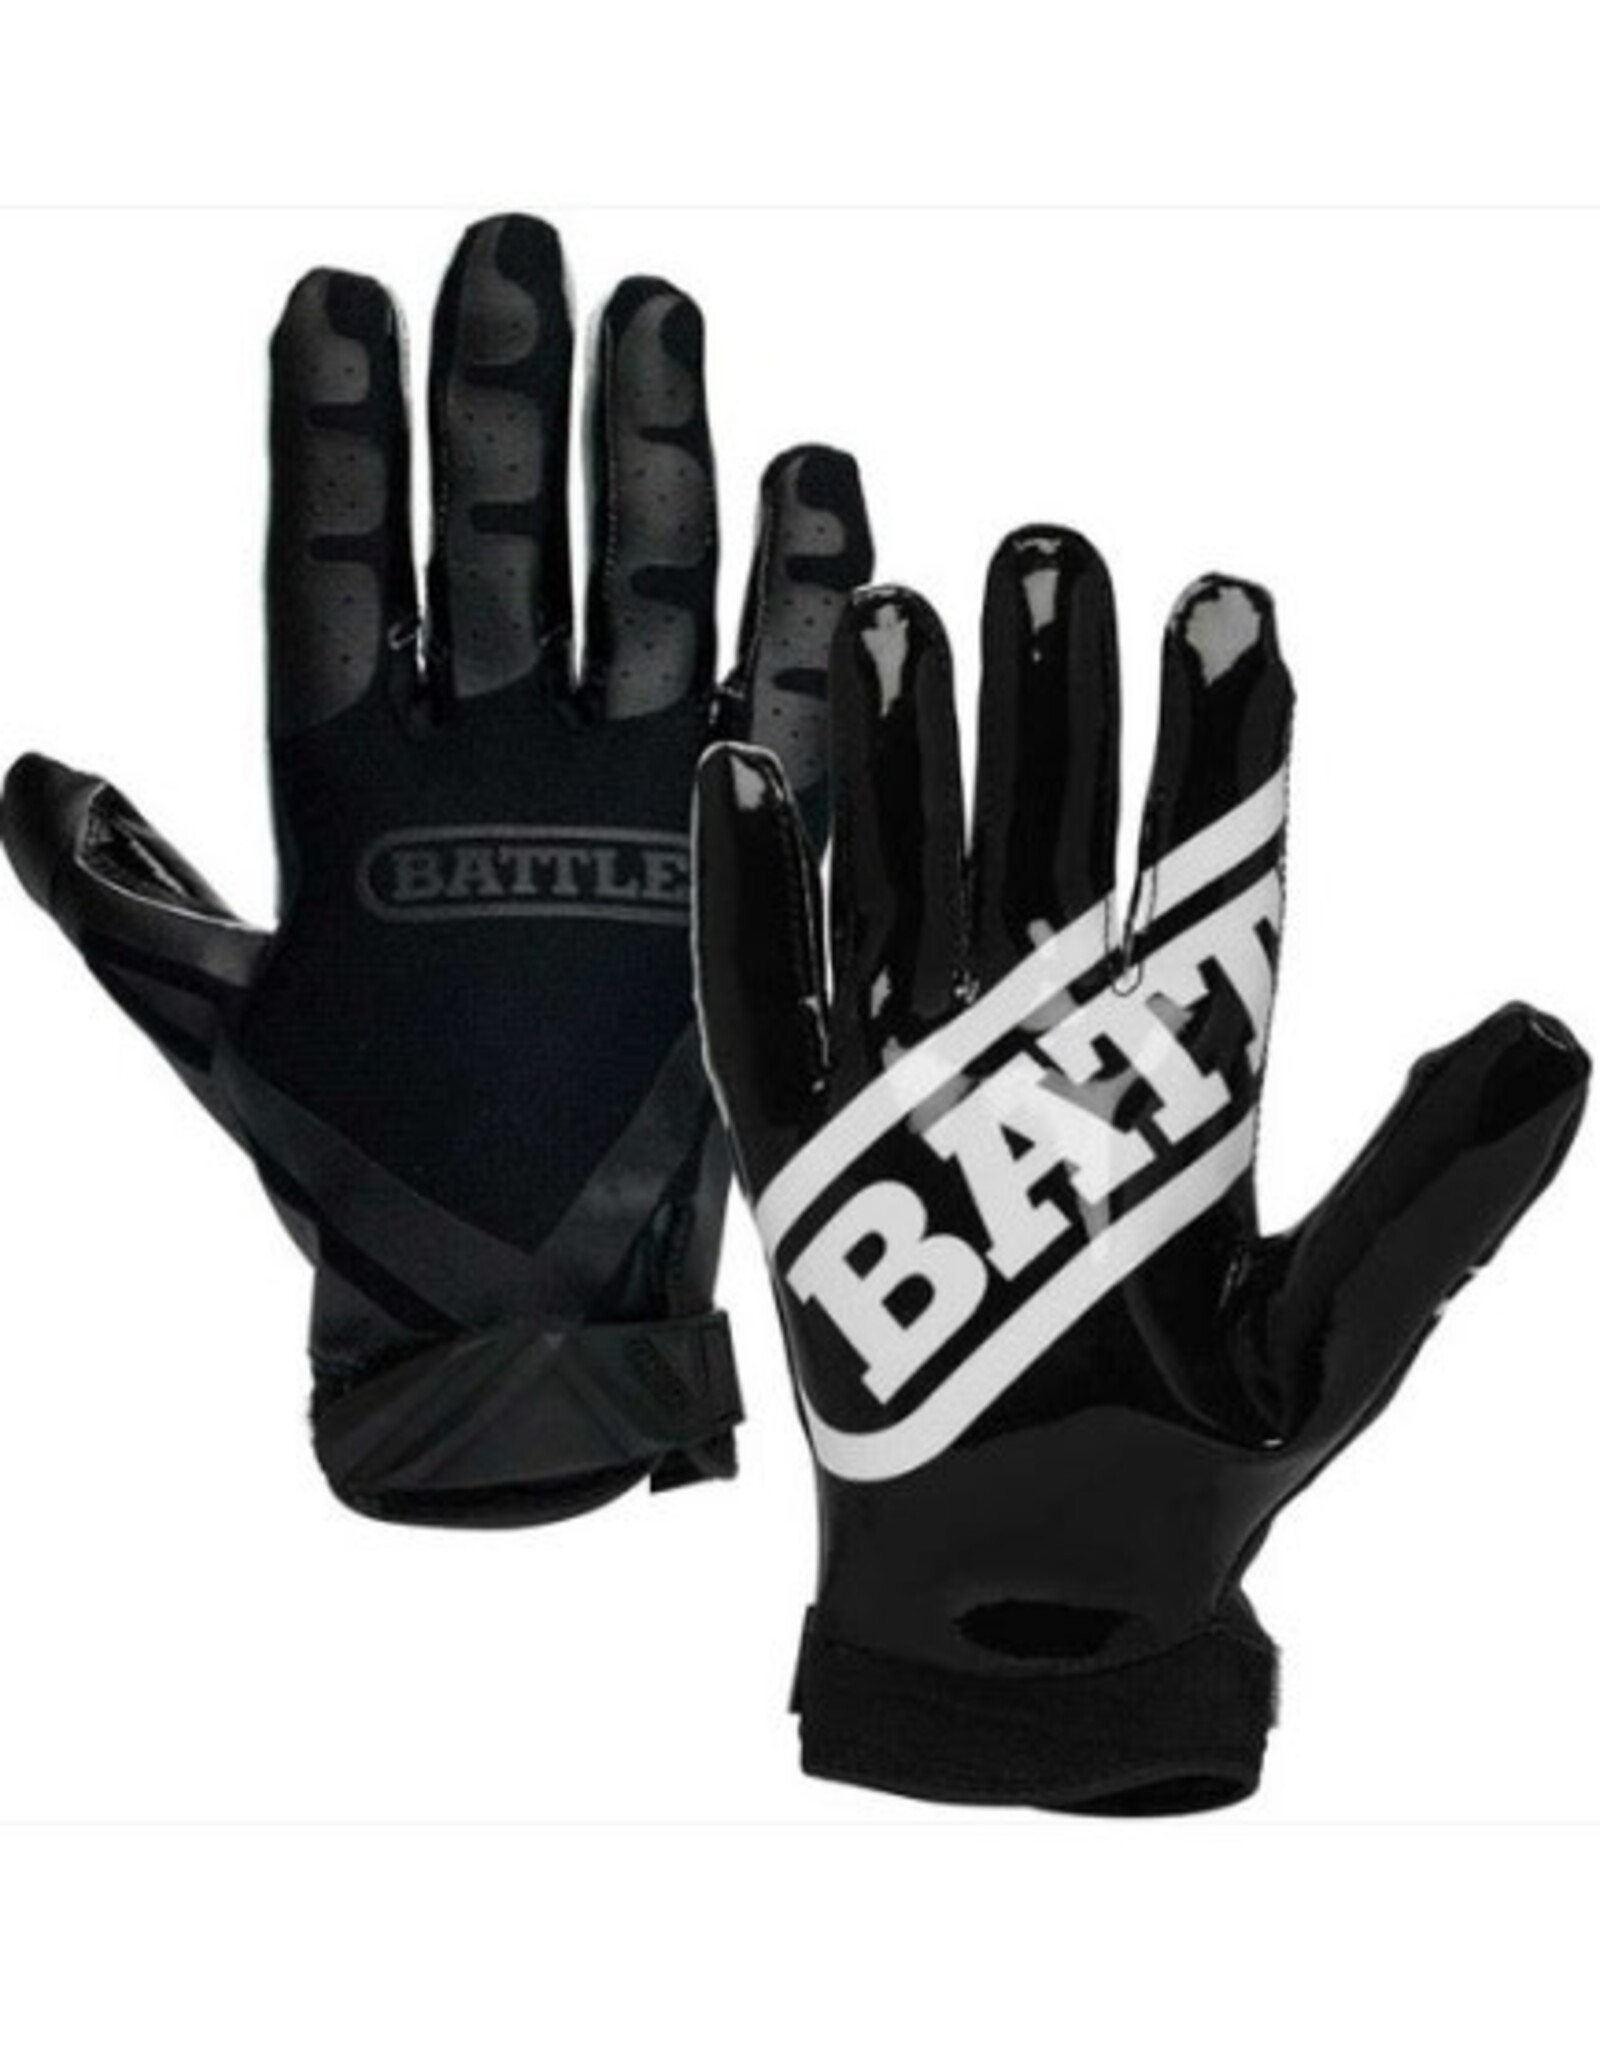 Battle Double Threat Receiver Football Gloves Youth